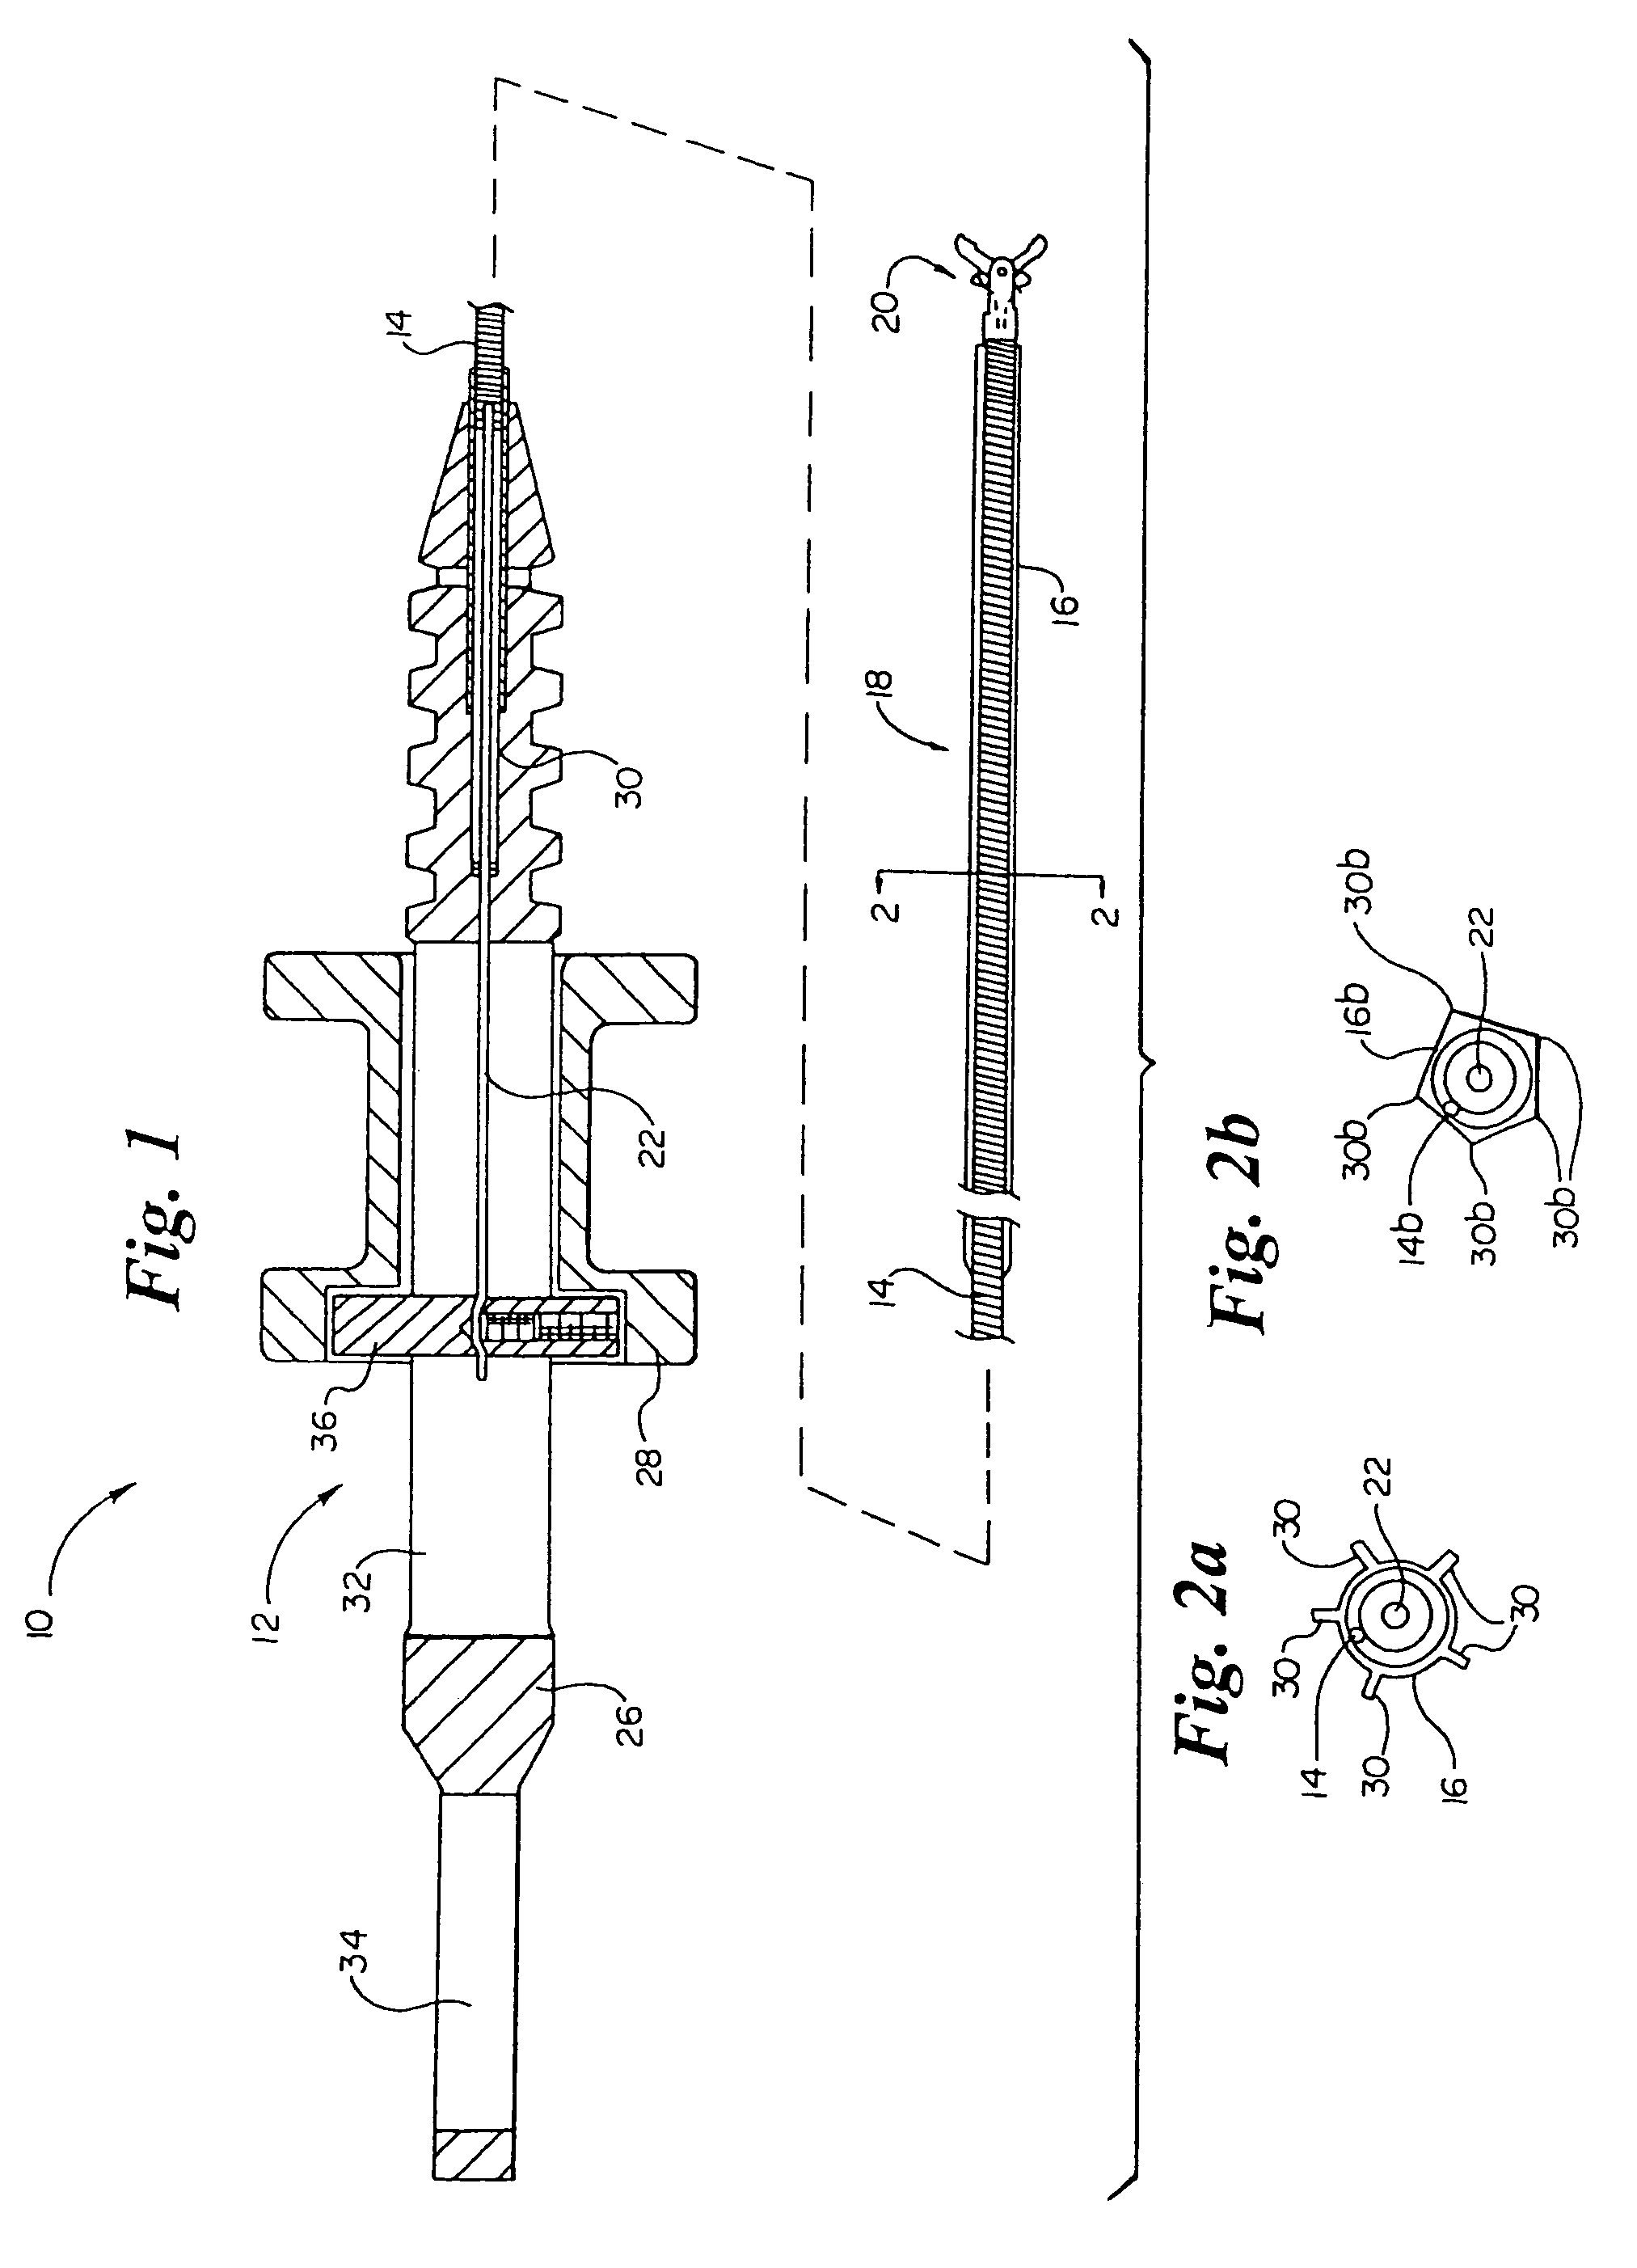 Endoscope and endoscopic instrument system having reduced backlash when moving the endoscopic instrument within a working channel of the endoscope